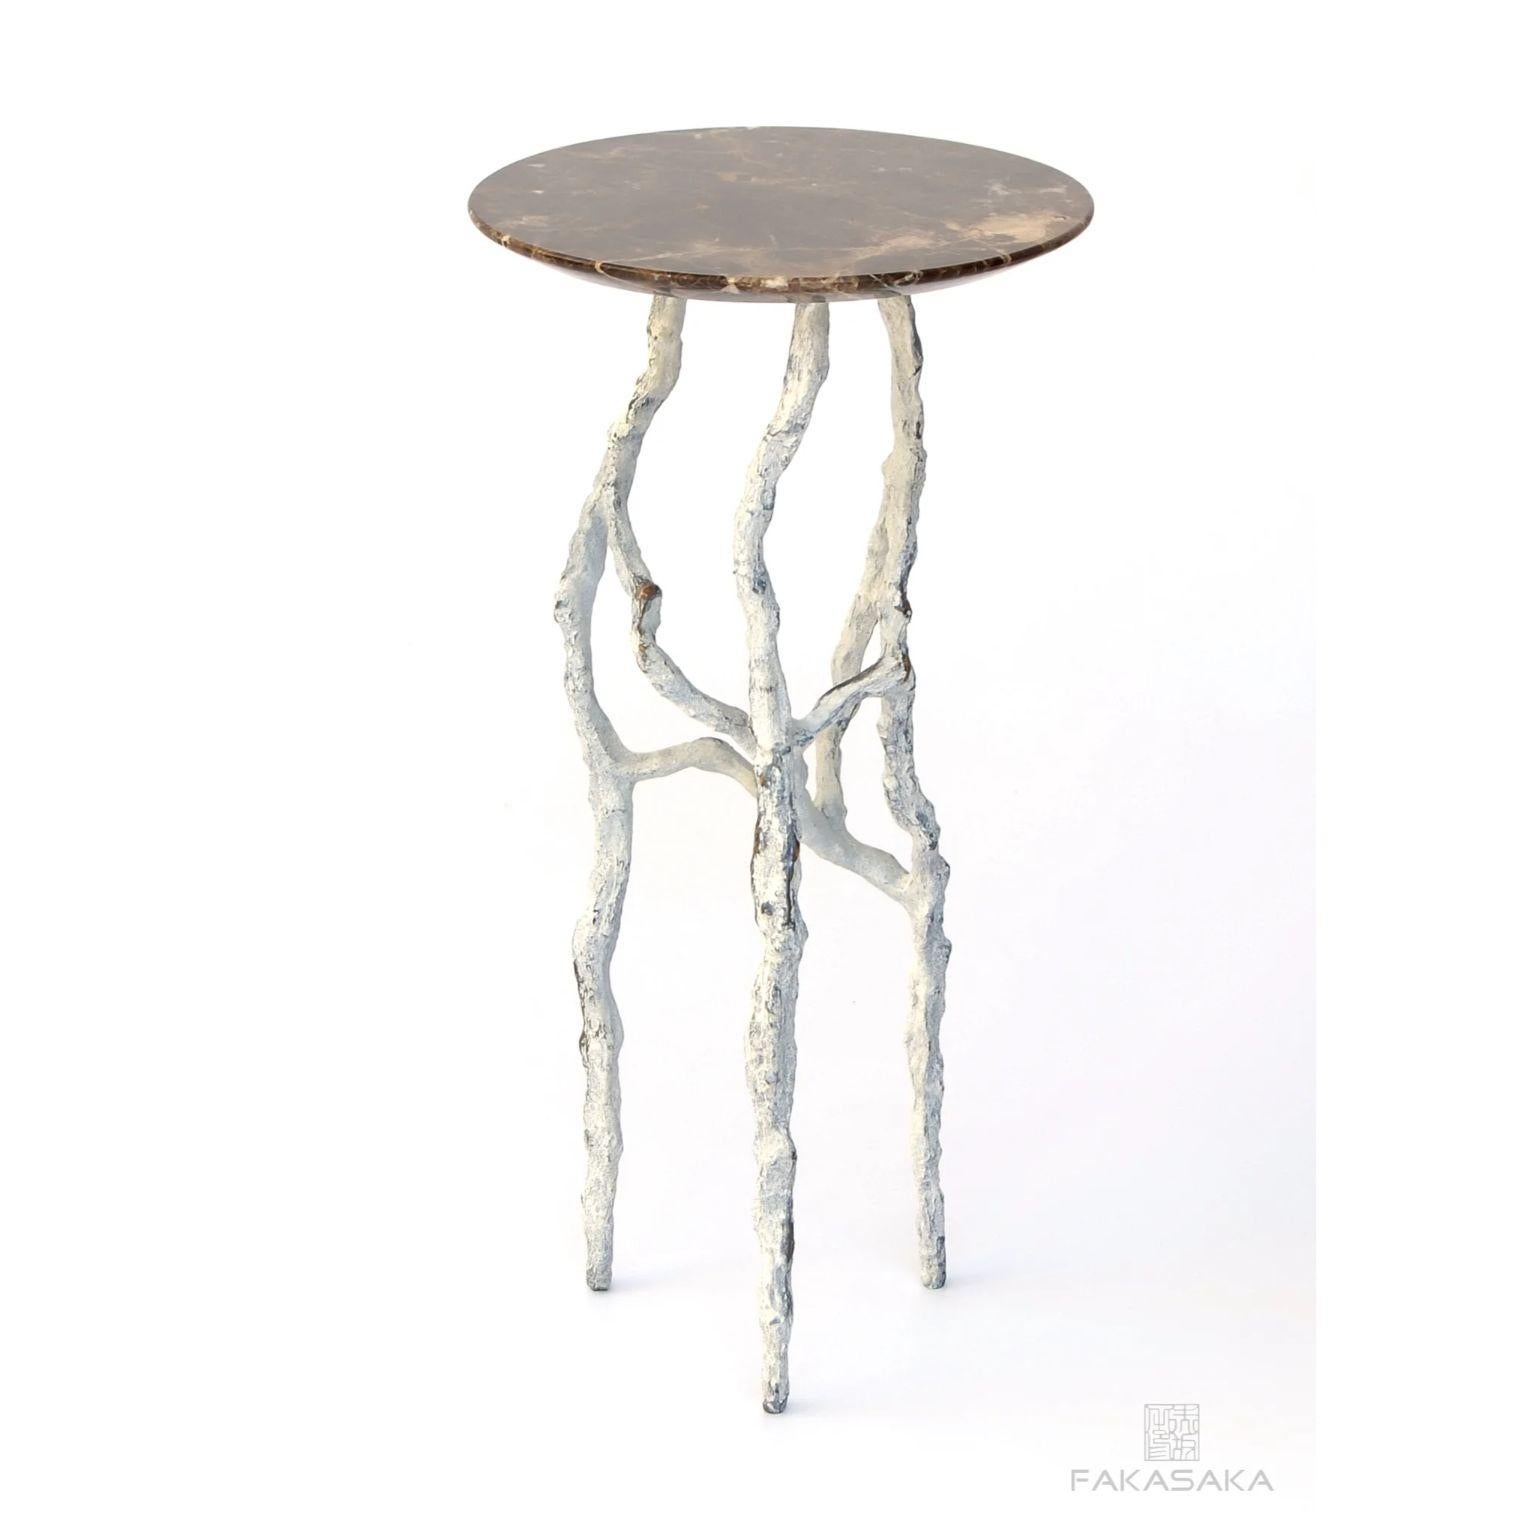 Contemporary Alexia 3 Drink Table with Marrom Imperial Marble Top by Fakasaka Design For Sale